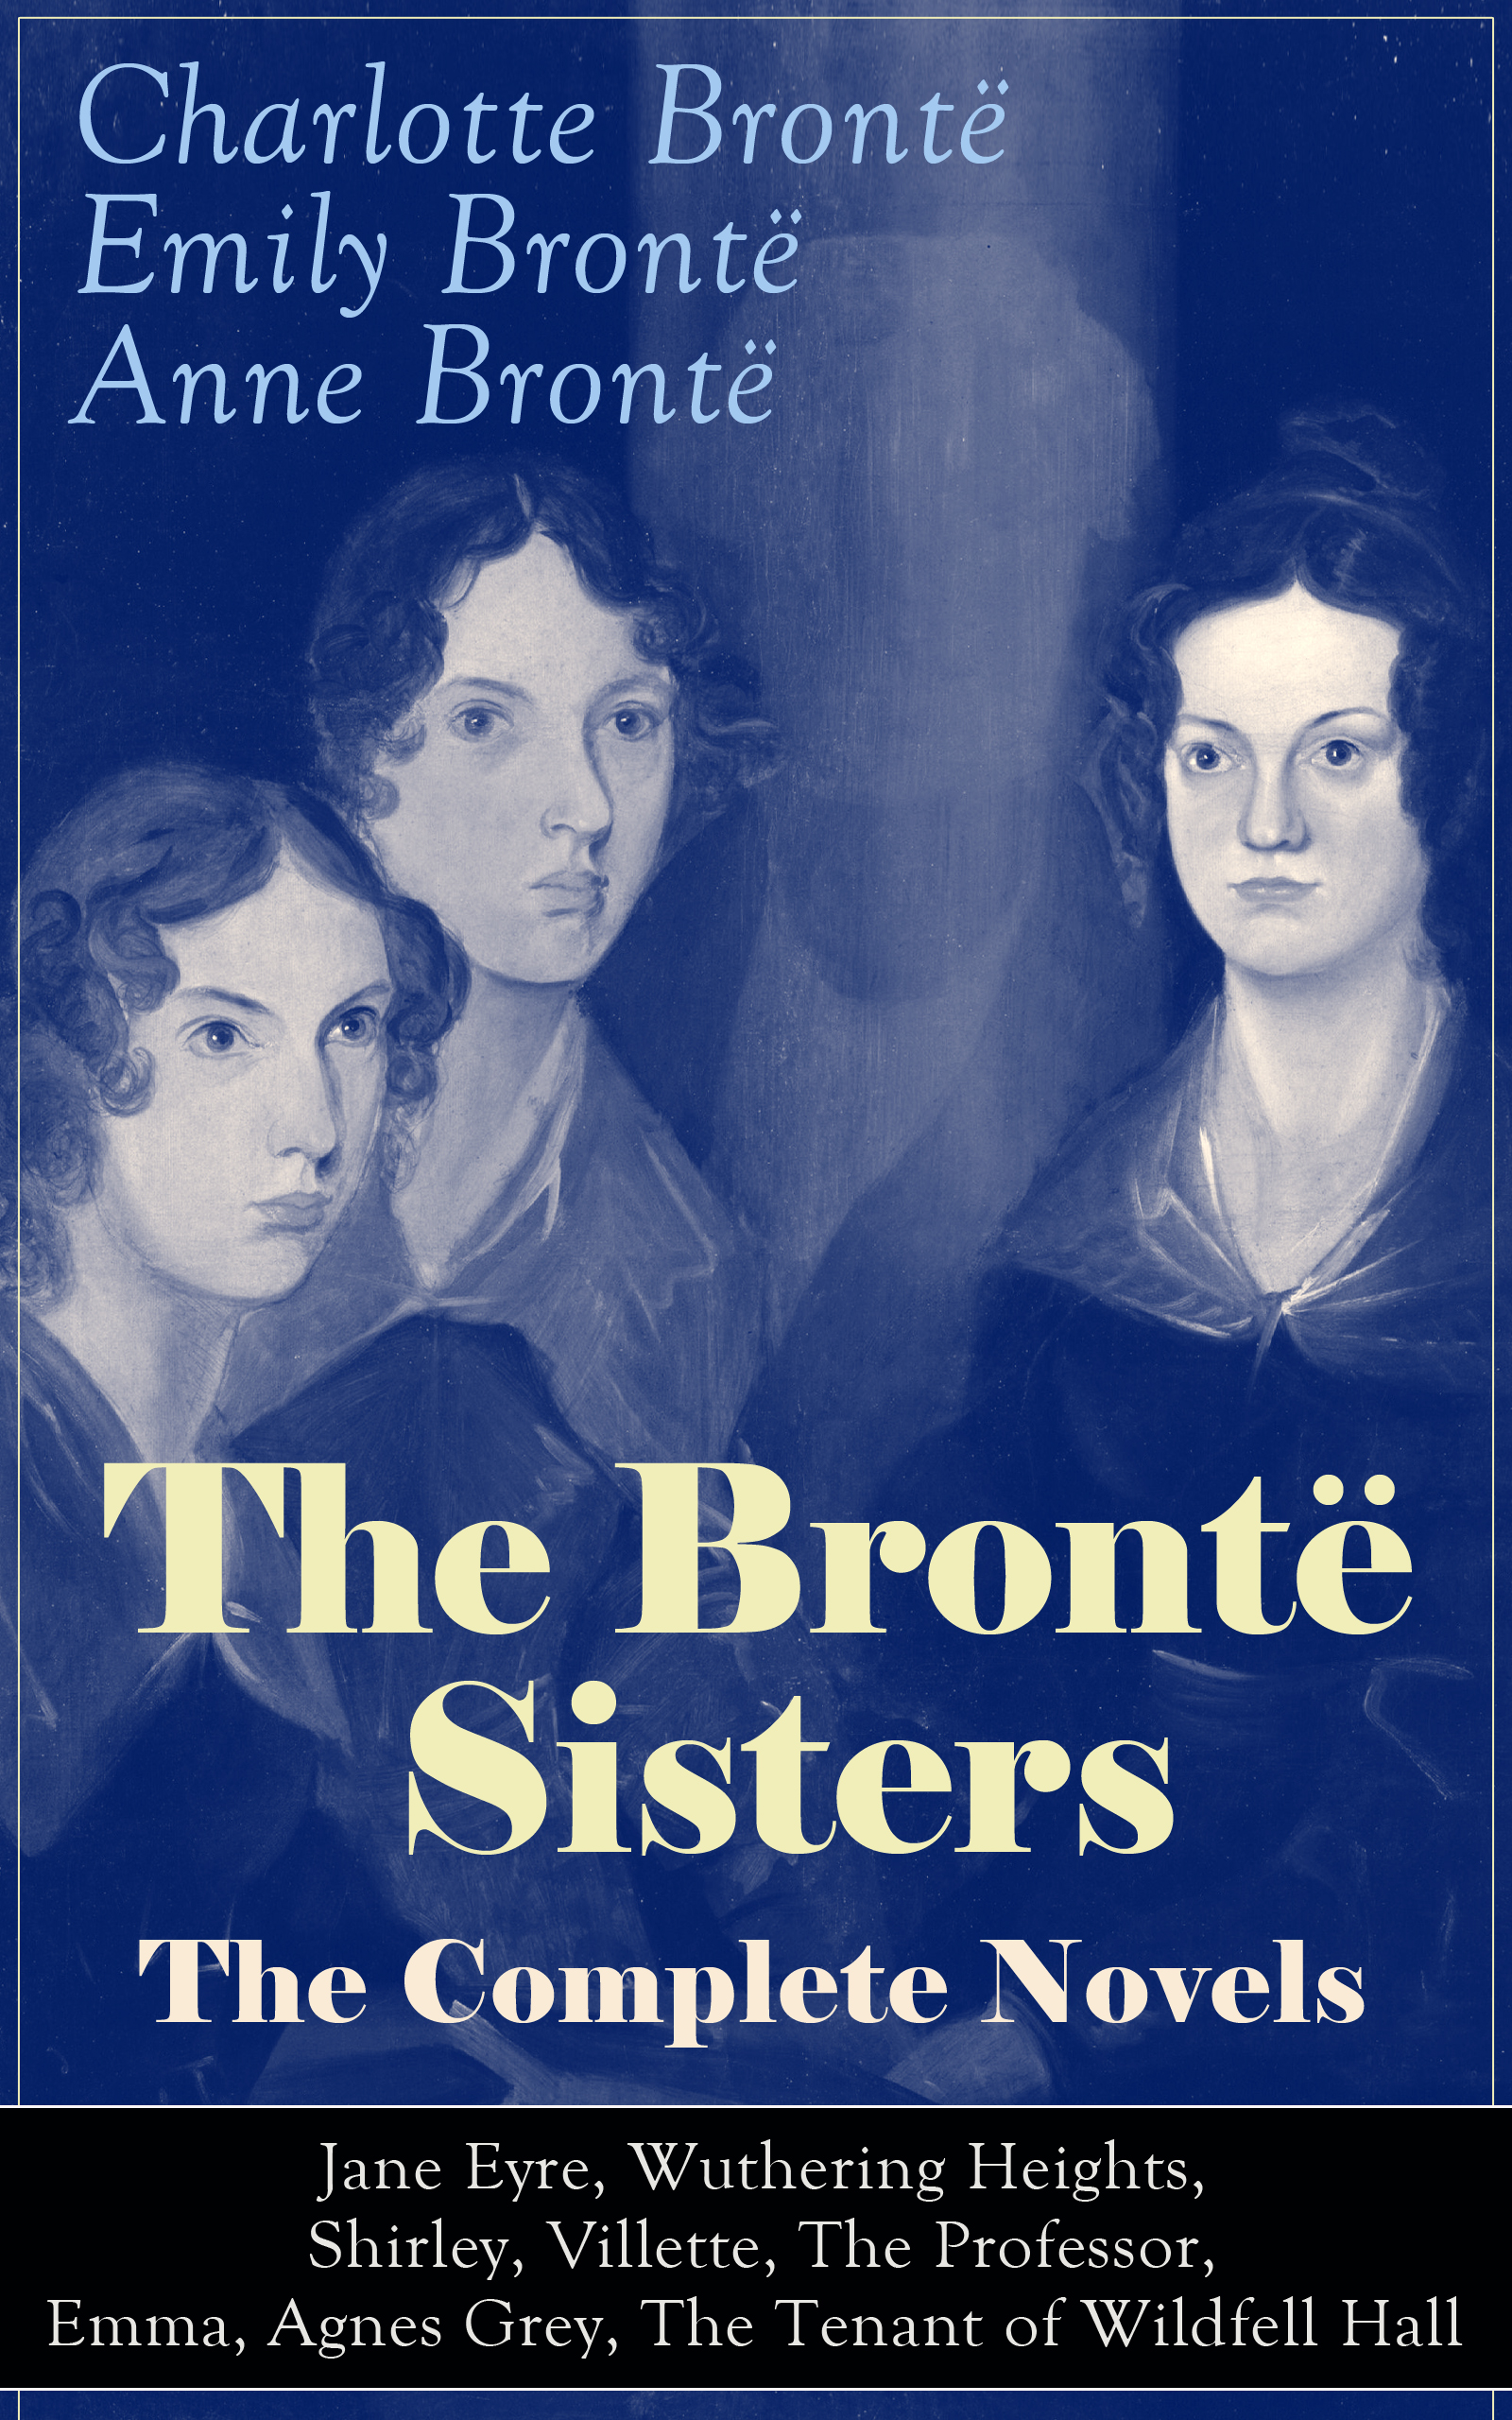 The Brontë Sisters The Complete Novels Jane Eyre Wuthering Heights Shirley Villette The